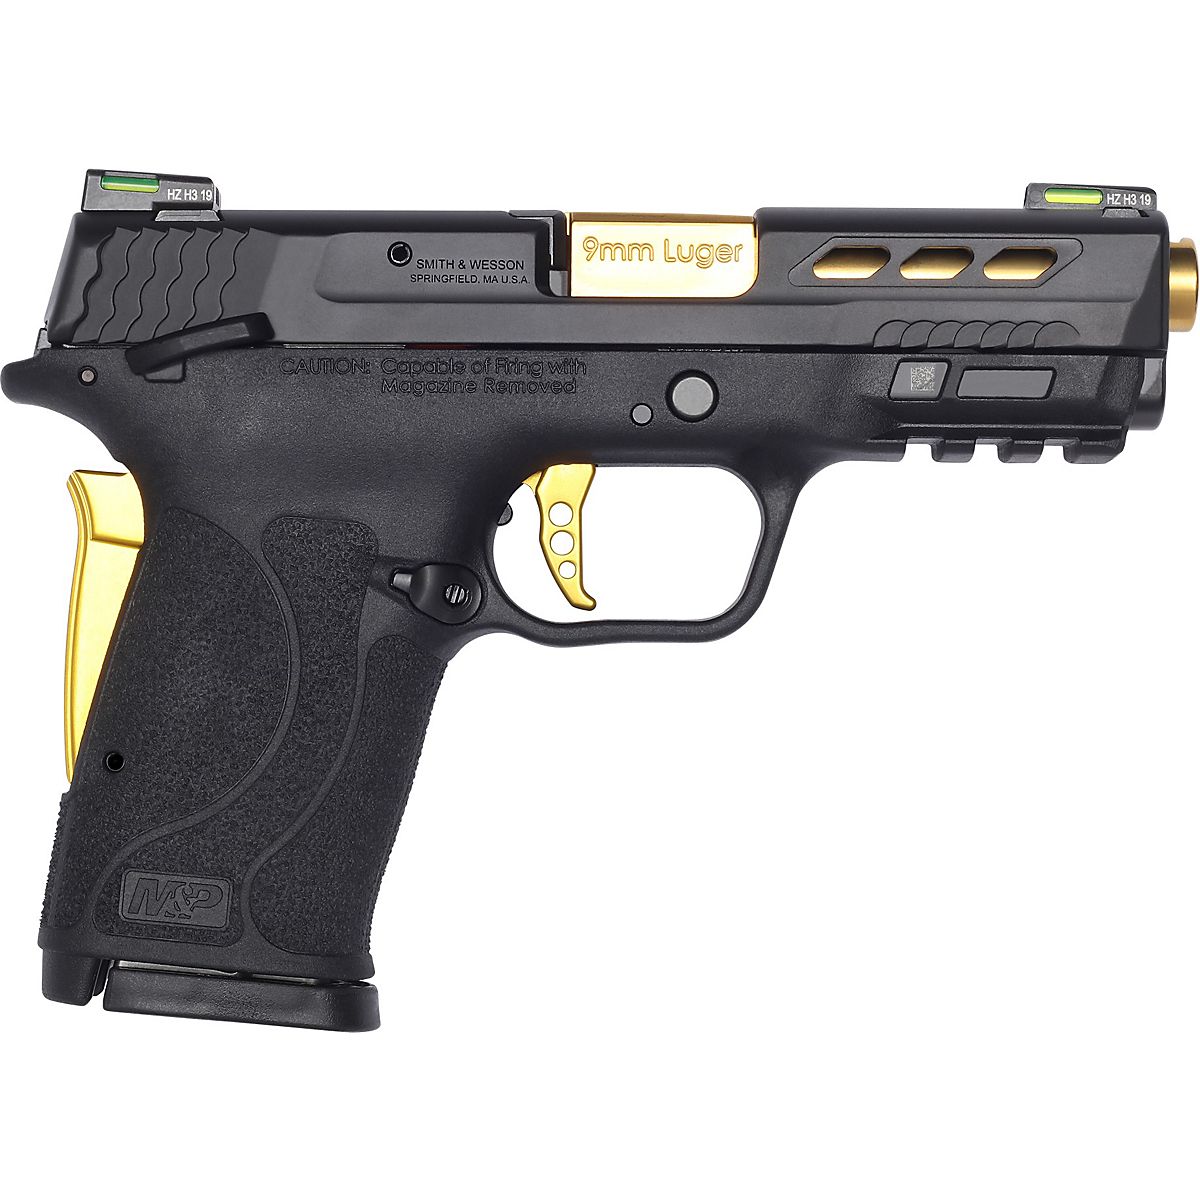 Smith And Wesson Performance Center Mandp 9 Shield Ez Ts Gold Ported Barrel 9mm Pistol Academy 4345